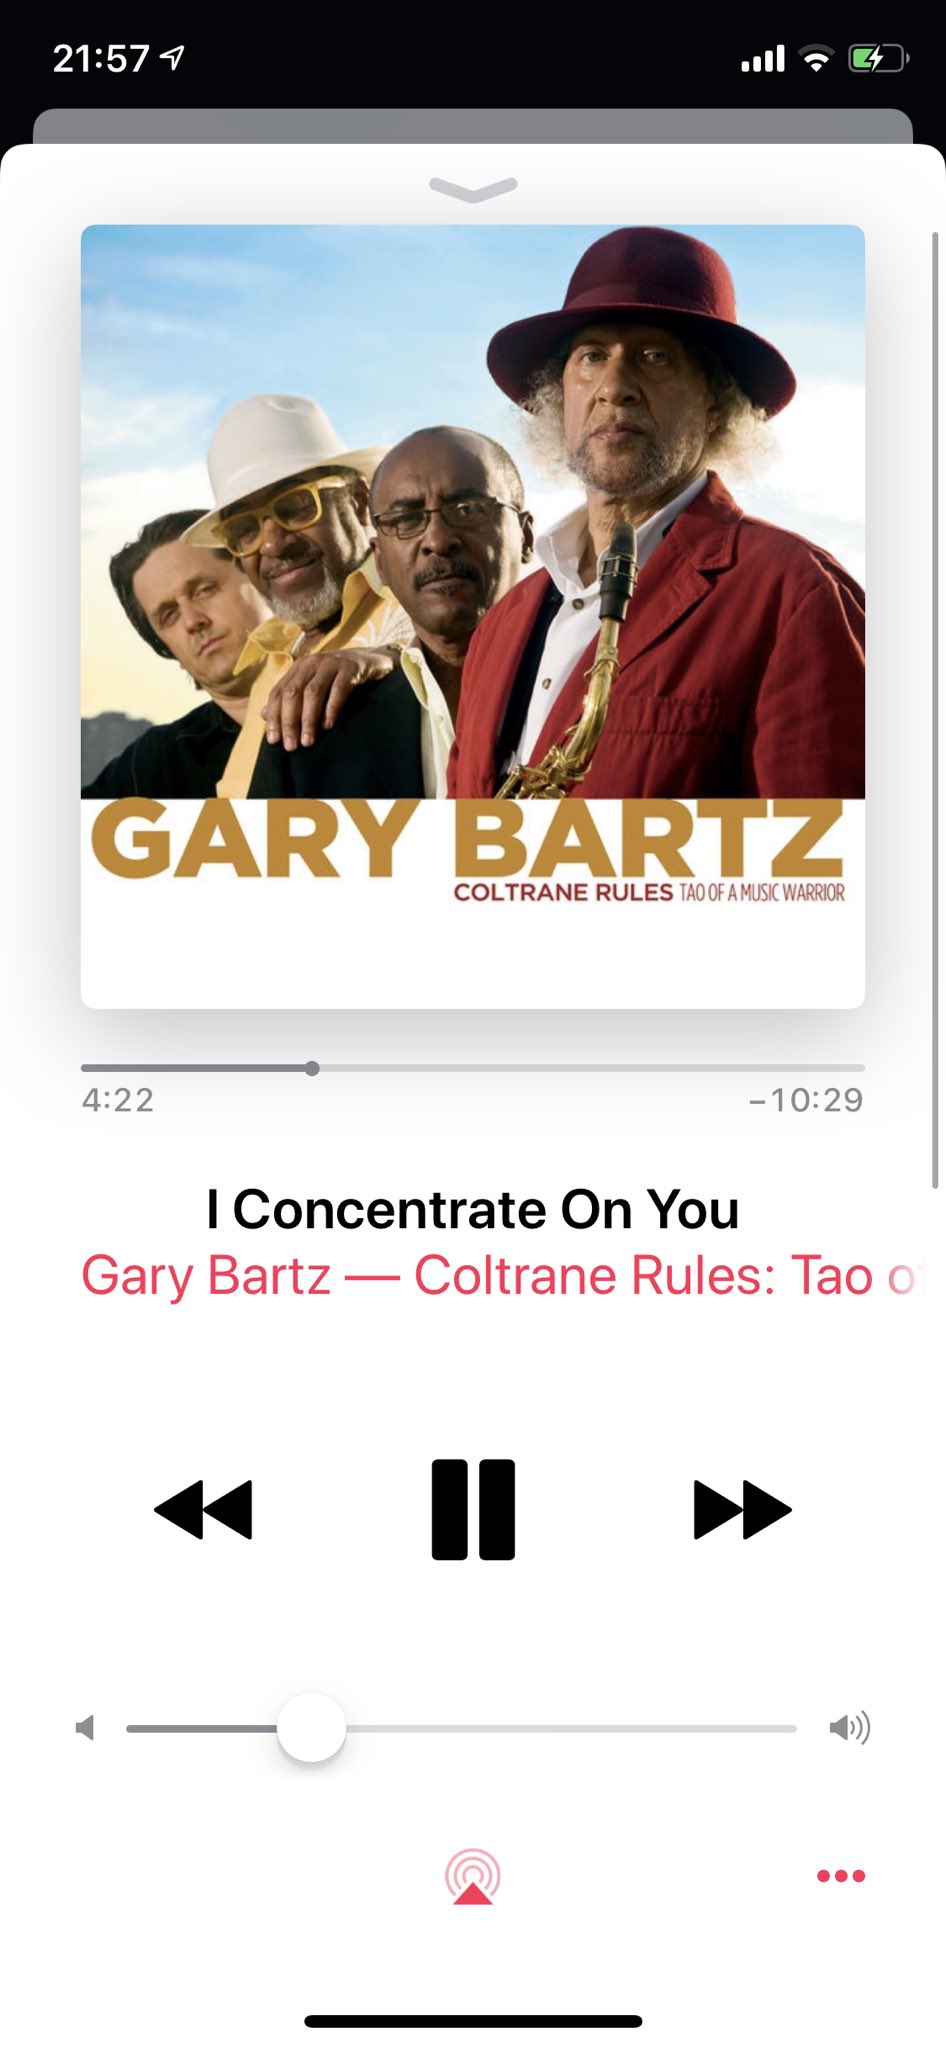 Just bought a few Gary Bartz albums tonight & just realised it s his birthday! So Happy Birthday 